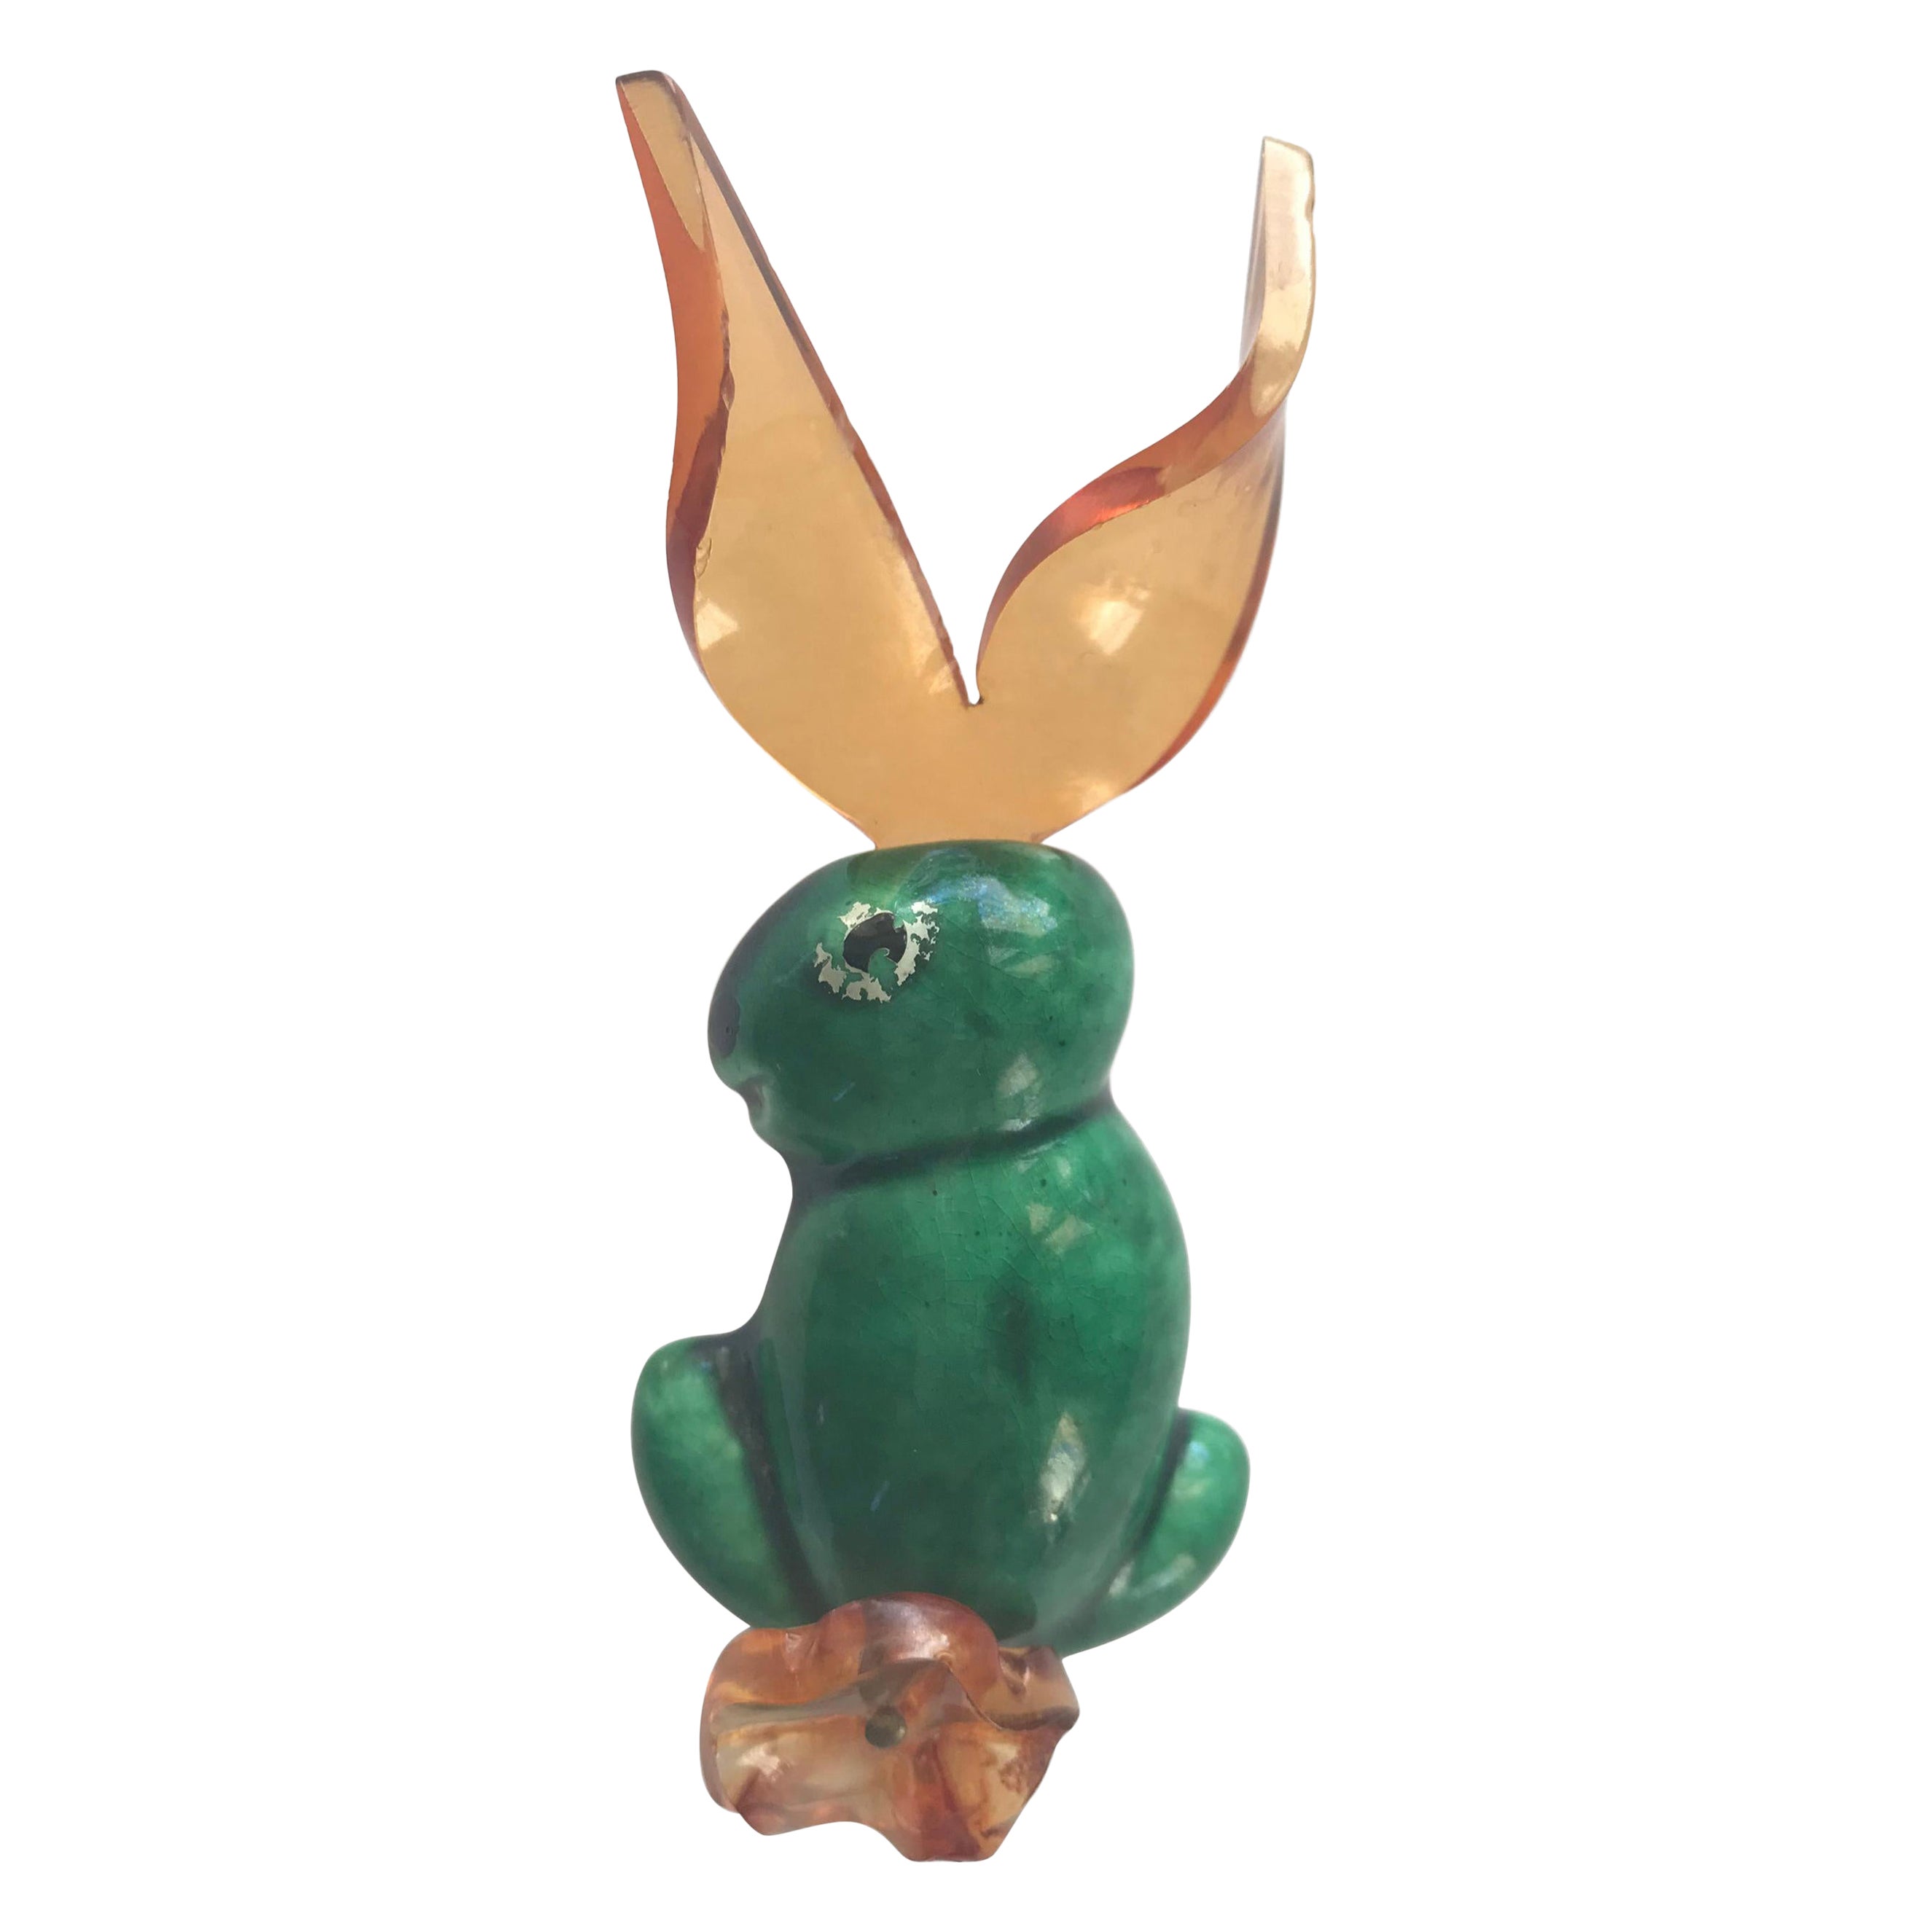 ELZAC ceramic bunny brooch, Jelly belly lucite ears L. Angeles  1940  